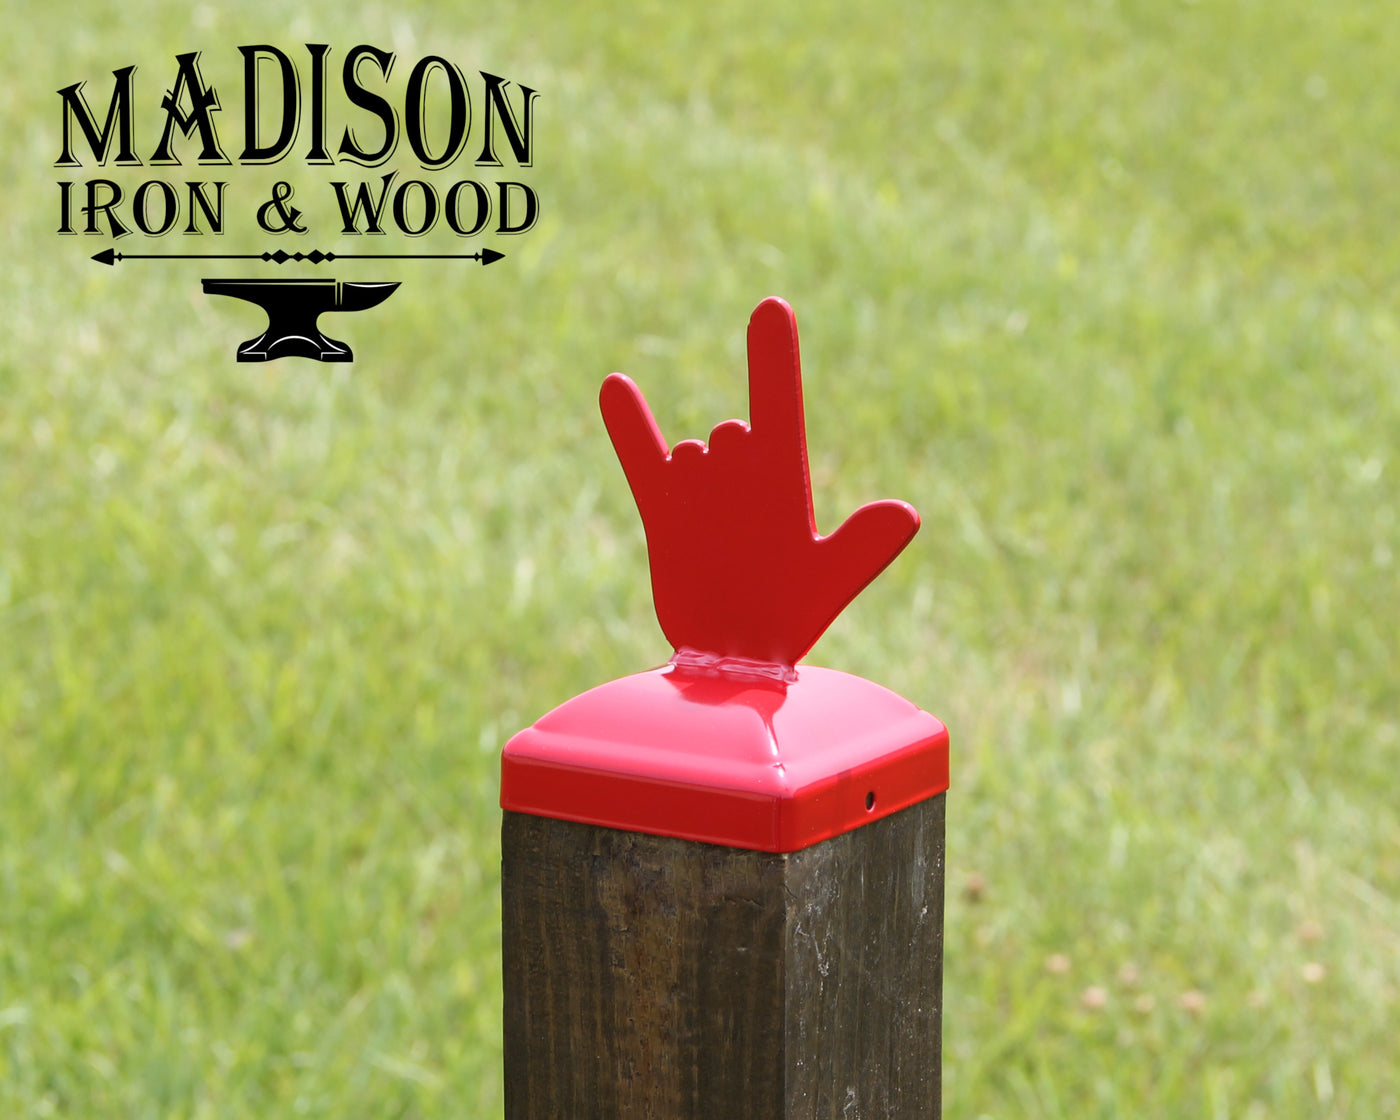 4x4 Love Hand Gesture Post Cap - Madison Iron and Wood - Post Cap - metal outdoor decor - Steel deocrations - american made products - veteran owned business products - fencing decorations - fencing supplies - custom wall decorations - personalized wall signs - steel - decorative post caps - steel post caps - metal post caps - brackets - structural brackets - home improvement - easter - easter decorations - easter gift - easter yard decor